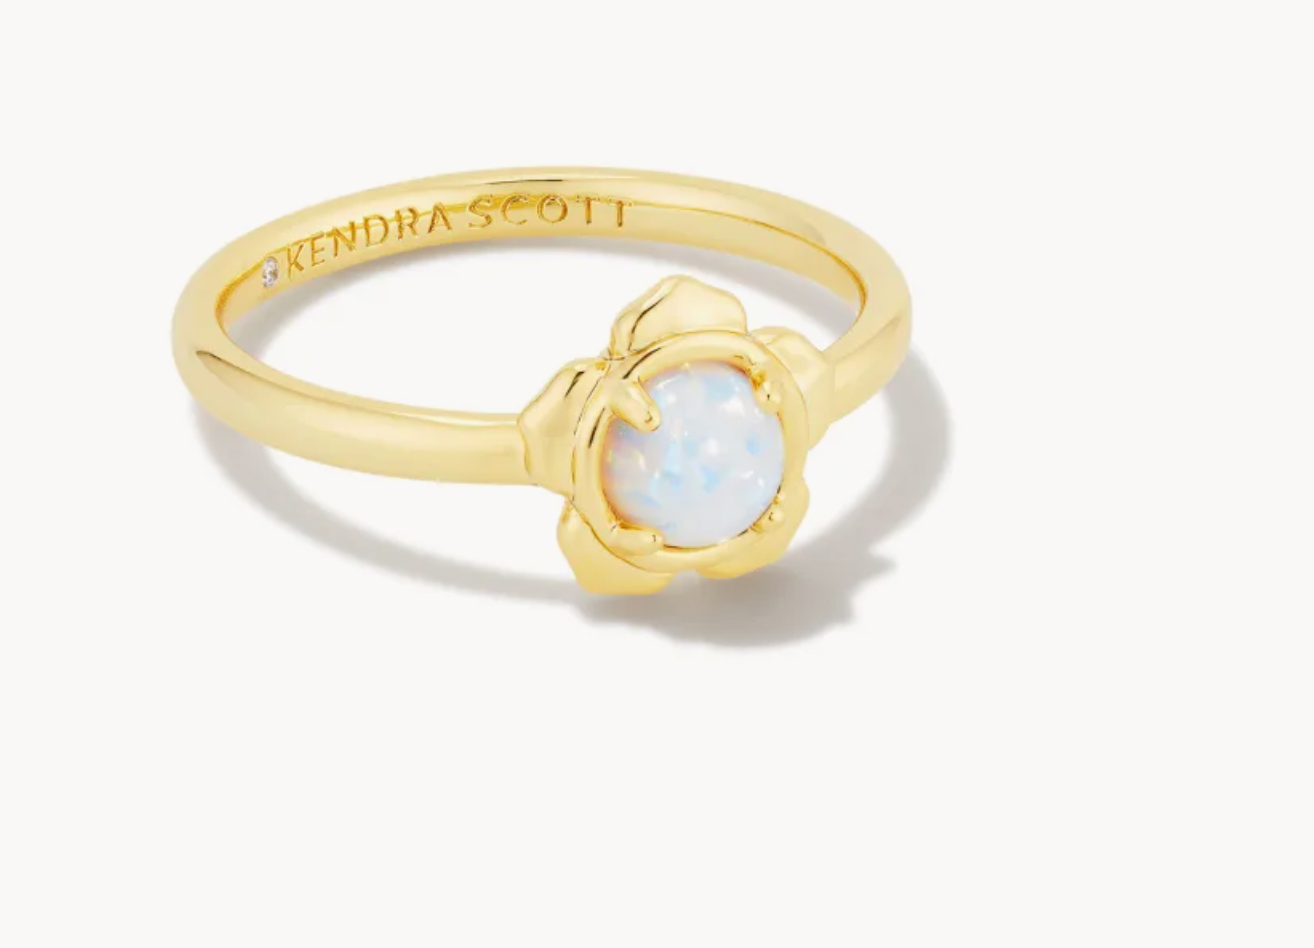 Kendra Scott Susie Gold Band Ring in Bright White Kyocera Opal